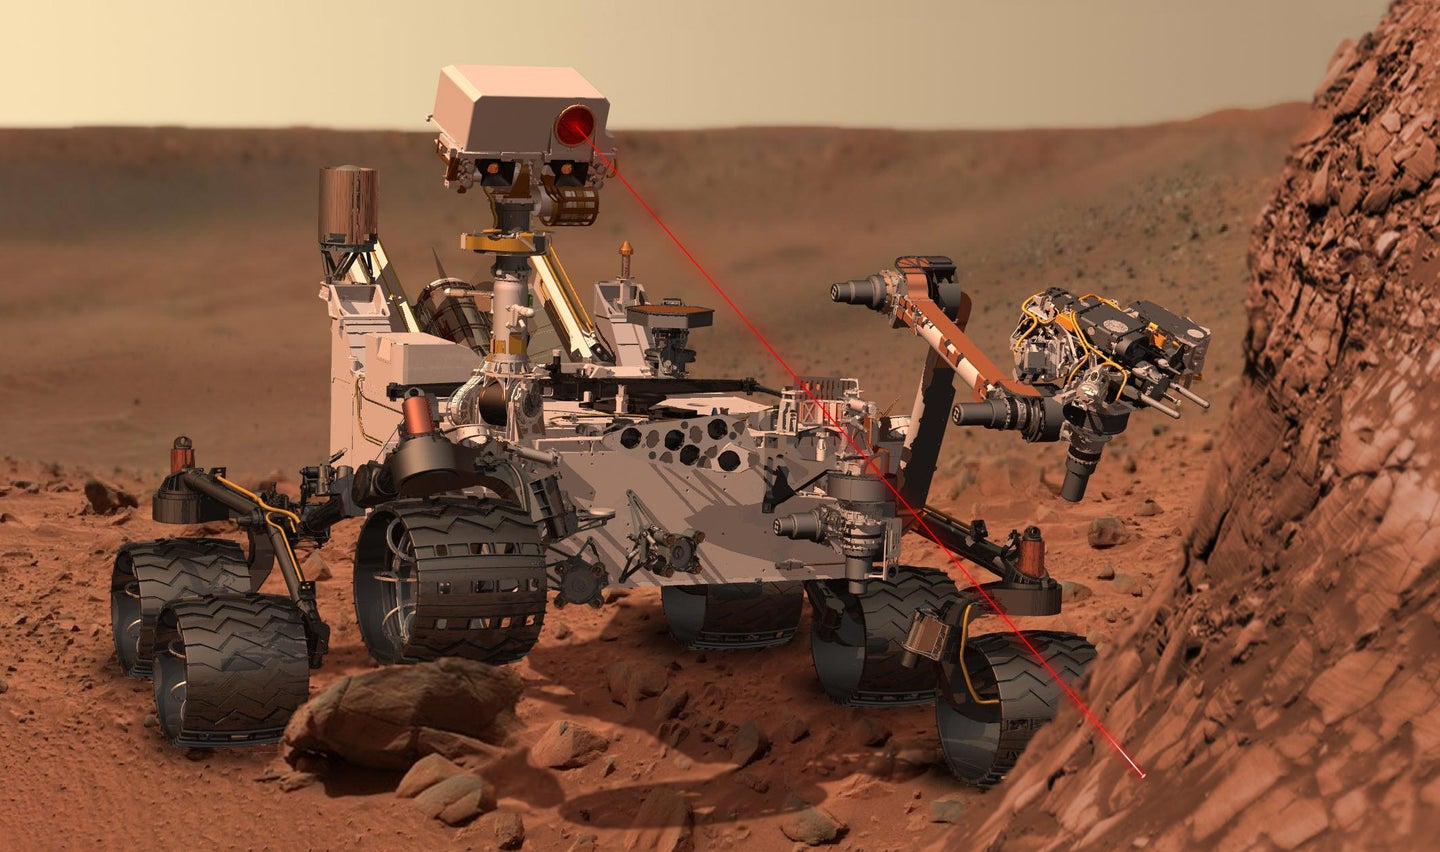 On Saturday, November 26, NASA is scheduled to launch the Mars Science Laboratory (MSL) mission featuring Curiosity, the largest and most advanced rover ever sent to the Red Planet. The Curiosity rover bristles with multiple cameras and instruments, including Goddard's Sample Analysis at Mars (SAM) instrument suite. By looking for evidence of water, carbon, and other important building blocks of life in the Martian soil and atmosphere, SAM will help discover whether Mars ever had the potential to support life. Curiosity will be delivered to Gale crater, a 96-mile-wide crater that contains a record of environmental changes in its sedimentary rock, in August 2012. ------ This artist's concept depicts the rover Curiosity, of NASA's Mars Science Laboratory mission, as it uses its Chemistry and Camera (ChemCam) instrument to investigate the composition of a rock surface. ChemCam fires laser pulses at a target and views the resulting spark with a telescope and spectrometers to identify chemical elements. The laser is actually in an invisible infrared wavelength, but is shown here as visible red light for purposes of illustration. NASA's Jet Propulsion Laboratory, a division of the California Institute of Technology, Pasadena, manages the Mars Science Laboratory Project for the NASA Science Mission Directorate, Washington, and designed and built Curiosity. More information about Curiosity is at http://mars.jpl.nasa.gov/msl/. Image Credit: NASA/JPL-Caltech NASA image use policy. NASA Goddard Space Flight Center enables NASA’s mission through four scientific endeavors: Earth Science, Heliophysics, Solar System Exploration, and Astrophysics. Goddard plays a leading role in NASA’s accomplishments by contributing compelling scientific knowledge to advance the Agency’s mission. Follow us on Twitter Like us on Facebook Find us on Instagram